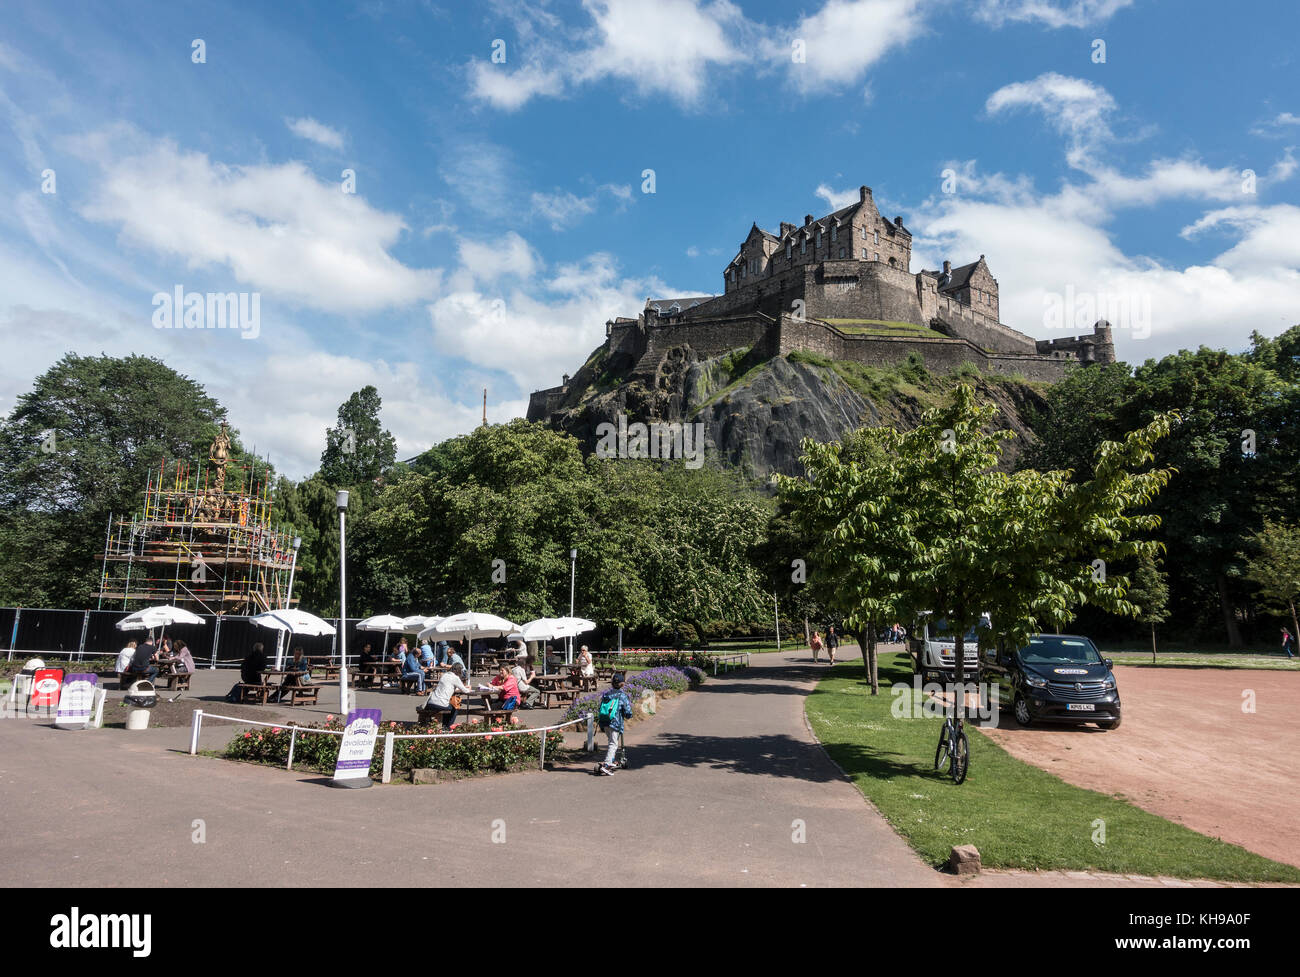 People Enjoy The Summertime Weather At An Outdoor Cafe In West Princes Street Gardens Shadowed By Castle Rock With Edinburgh Castle And The Ross Fount Stock Photo